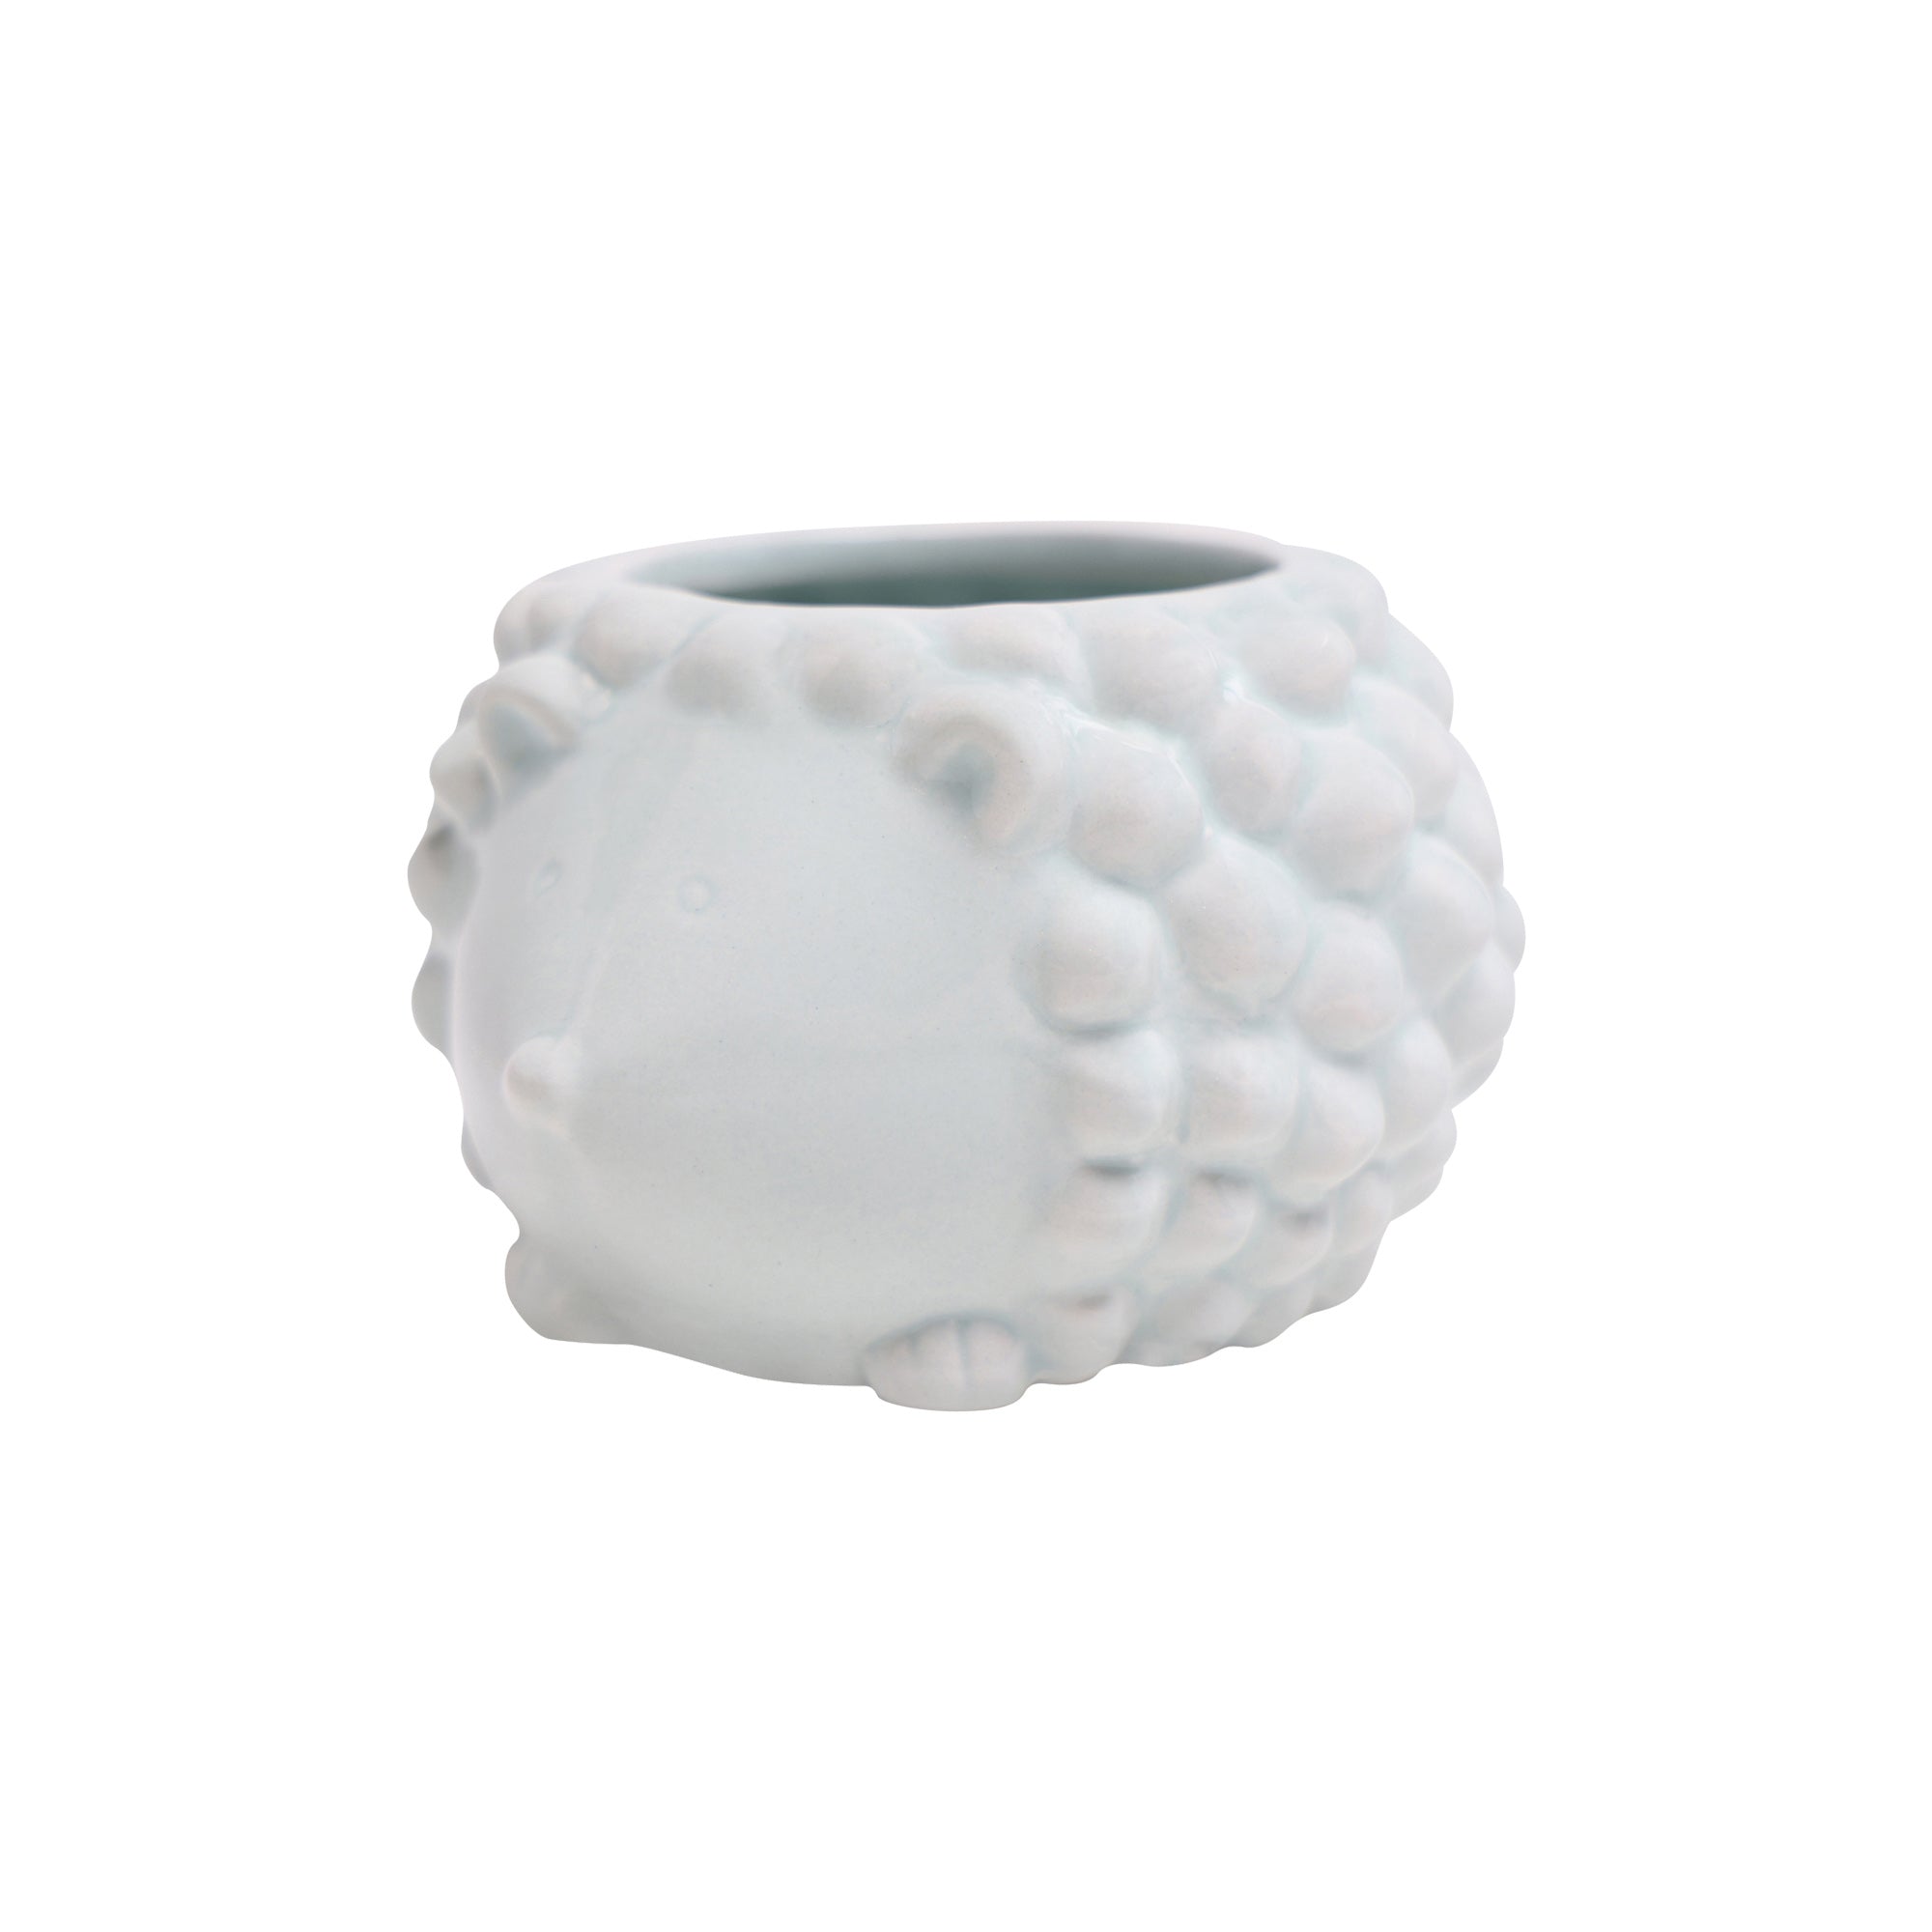 A Hedgehog Ceramic Indoor Plant Pot For Succulents from Chive Studio 2024, shaped like a hedgehog with textured spines, featuring a hollow space for plants, displayed against a white background.